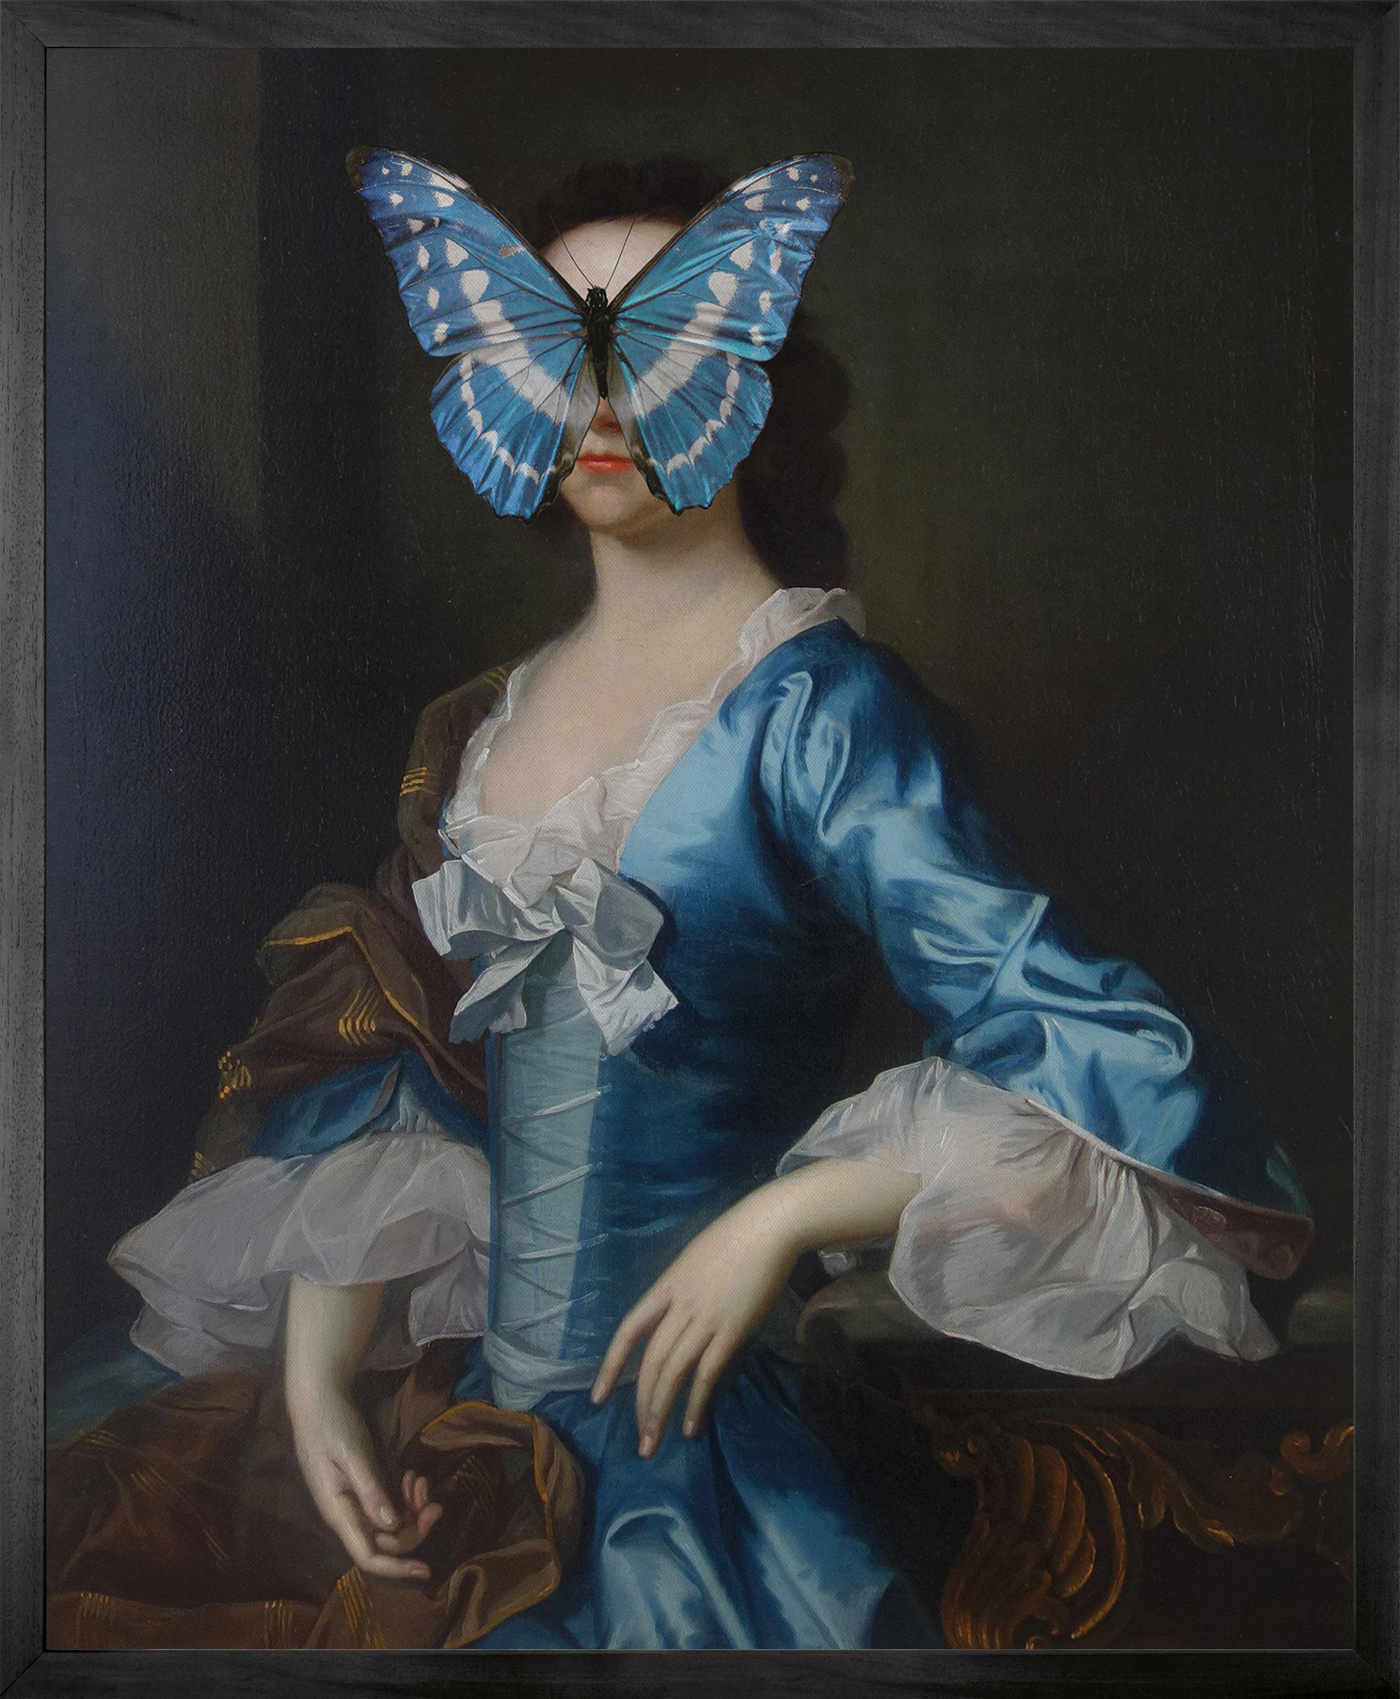 Portrait of Blue and White Butterfly on Lady